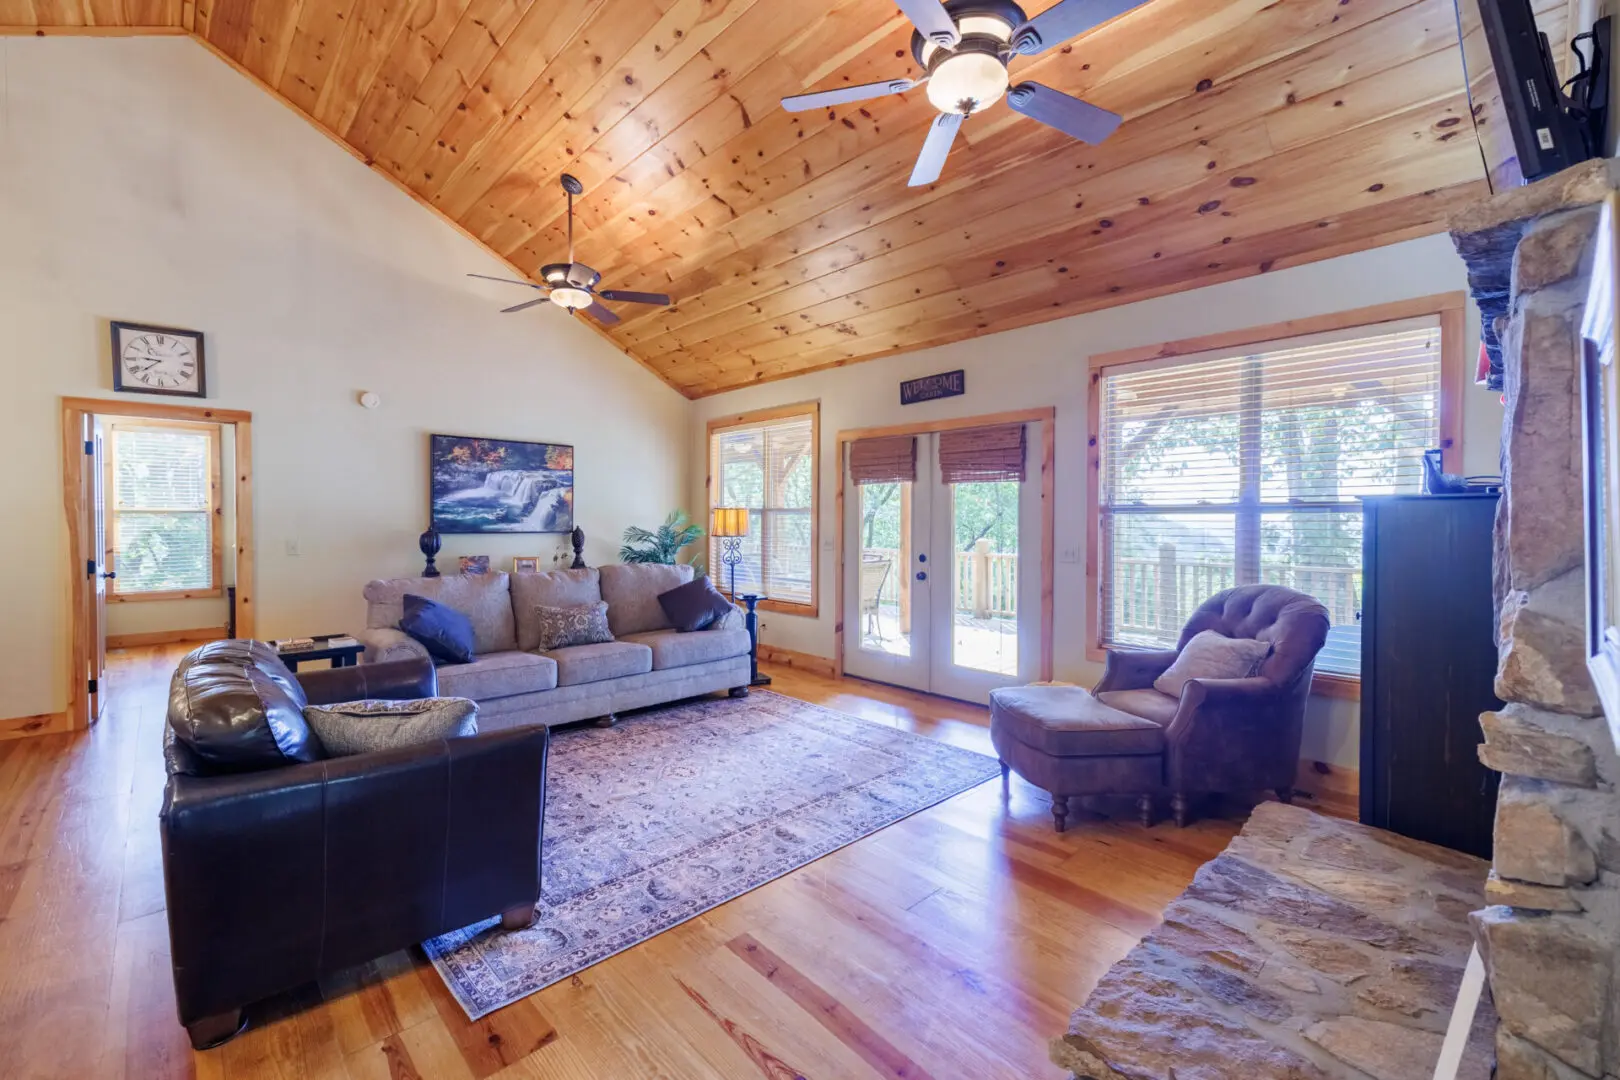 A living room with wood ceilings and a fan.